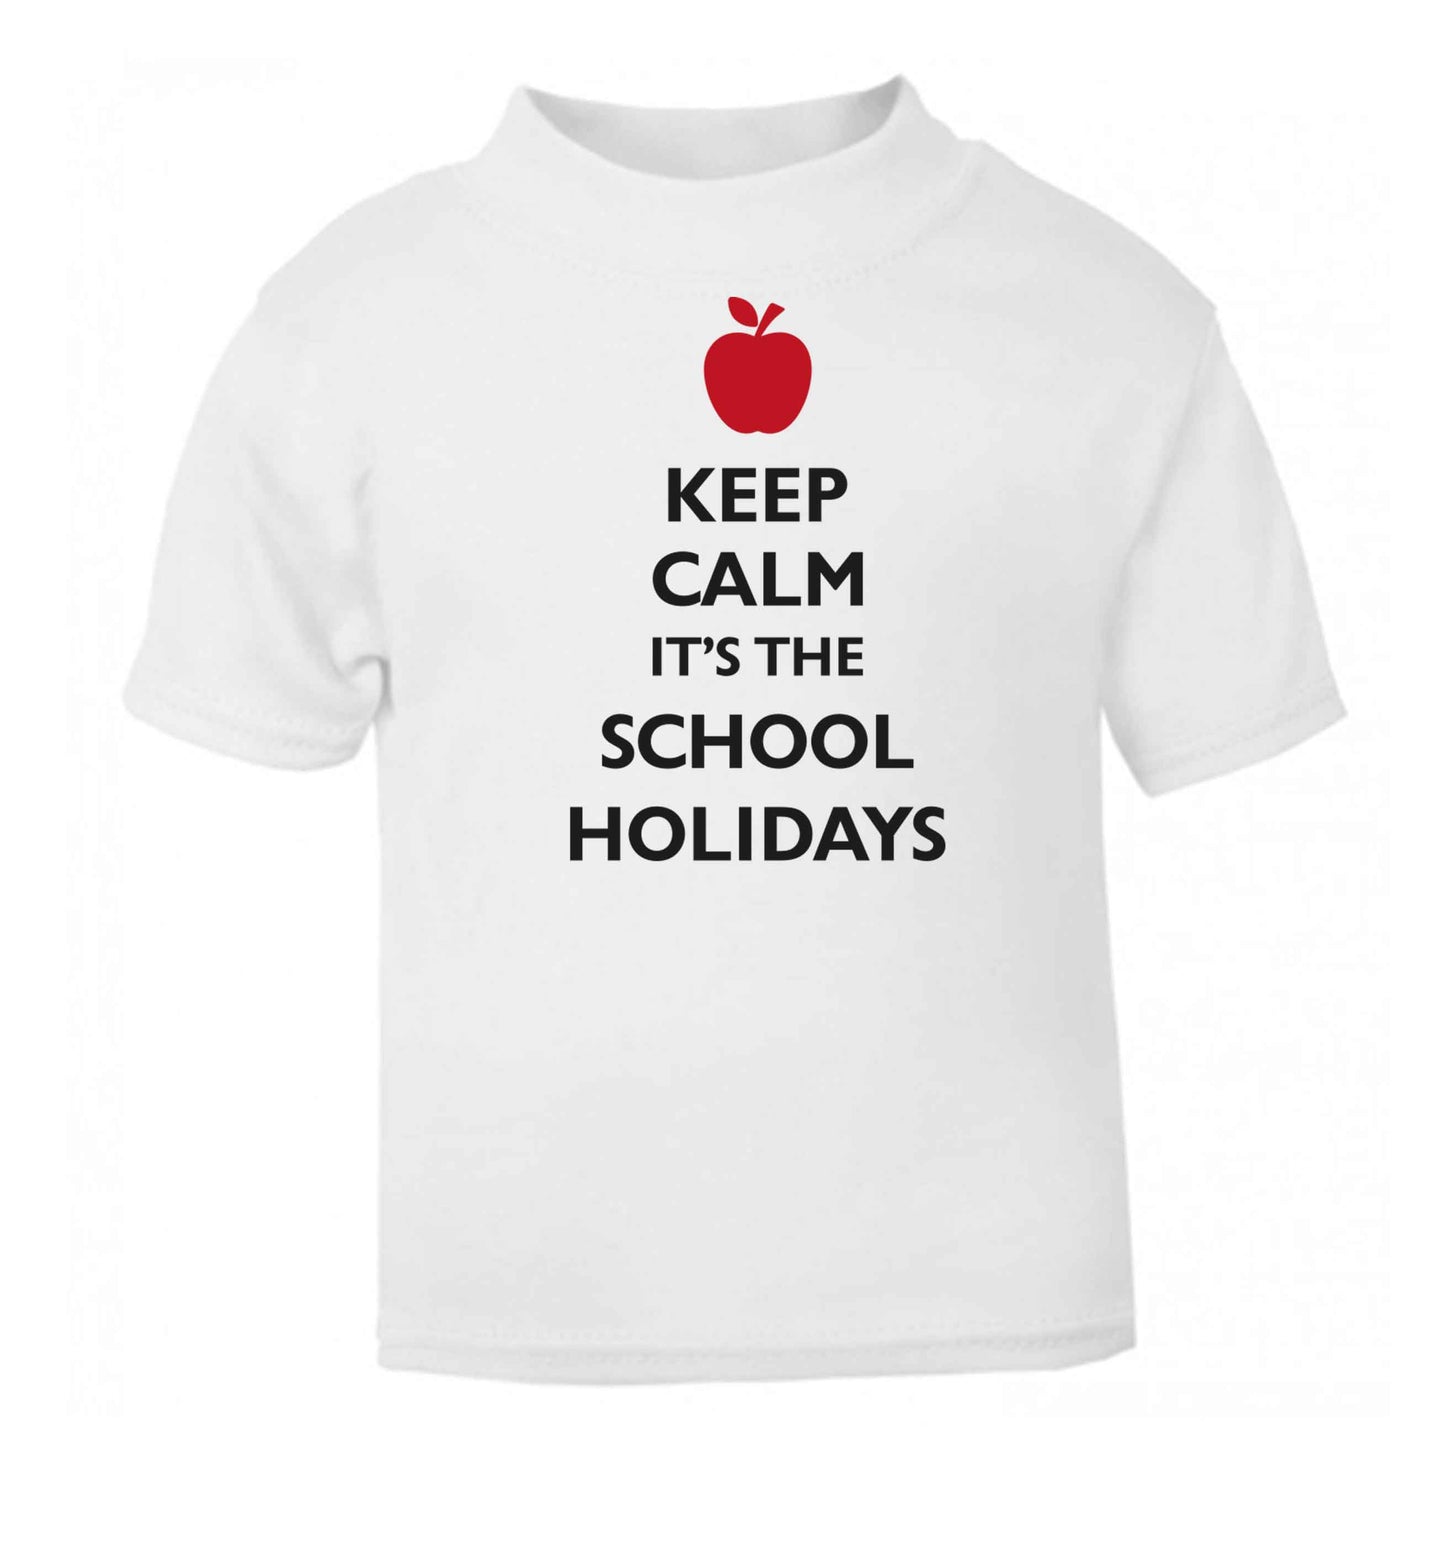 Keep calm it's the school holidays white baby toddler Tshirt 2 Years